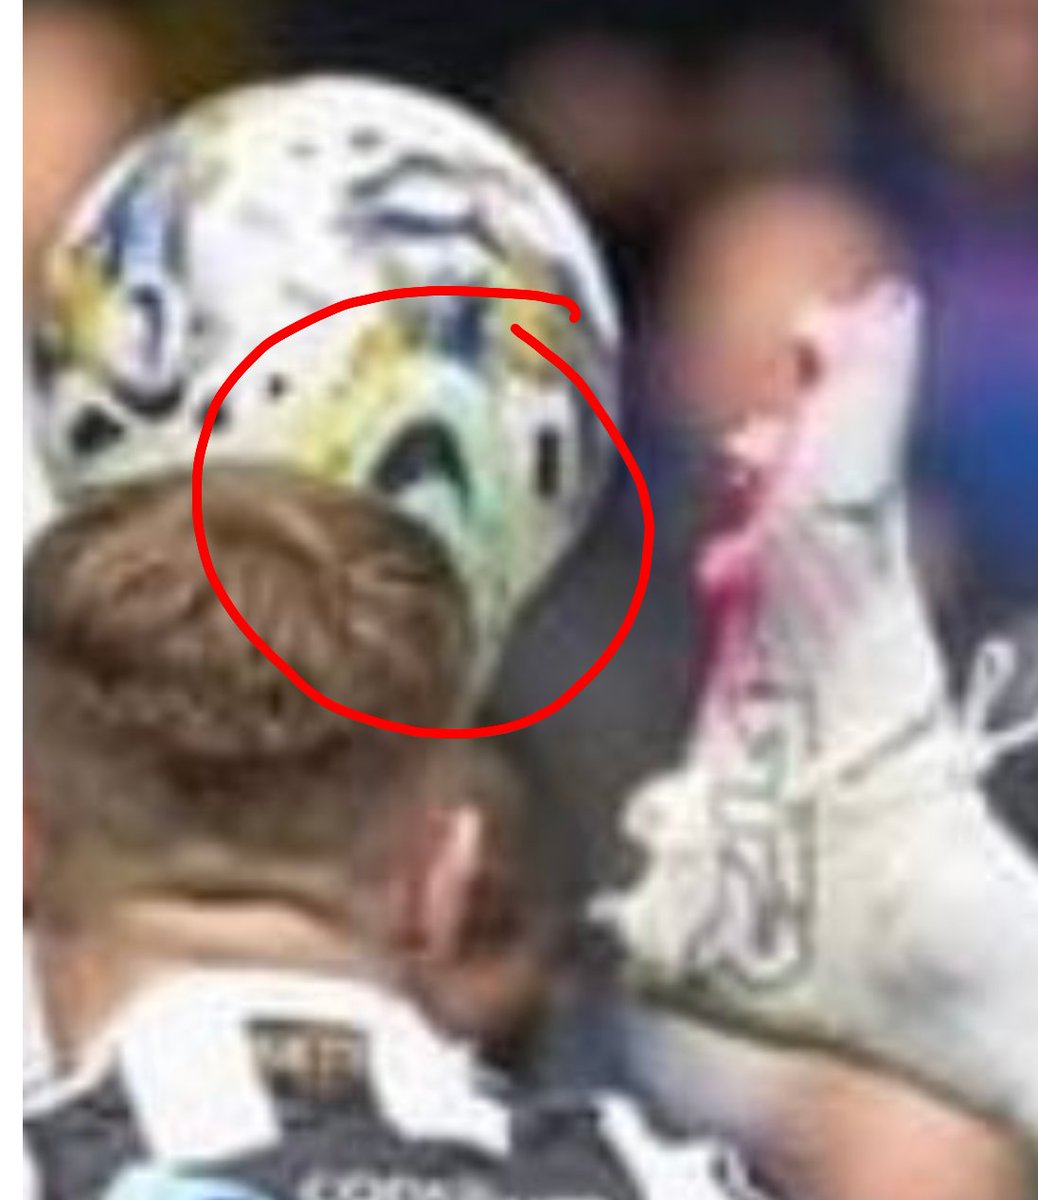 @mr_cmcl @scotsunsport The difference is Cantwell's foot is nowhere near the stmirren player's head. That's the st mirren boy's boot that is circled, so unless he was wearing it on his face his head is well away from the ball.